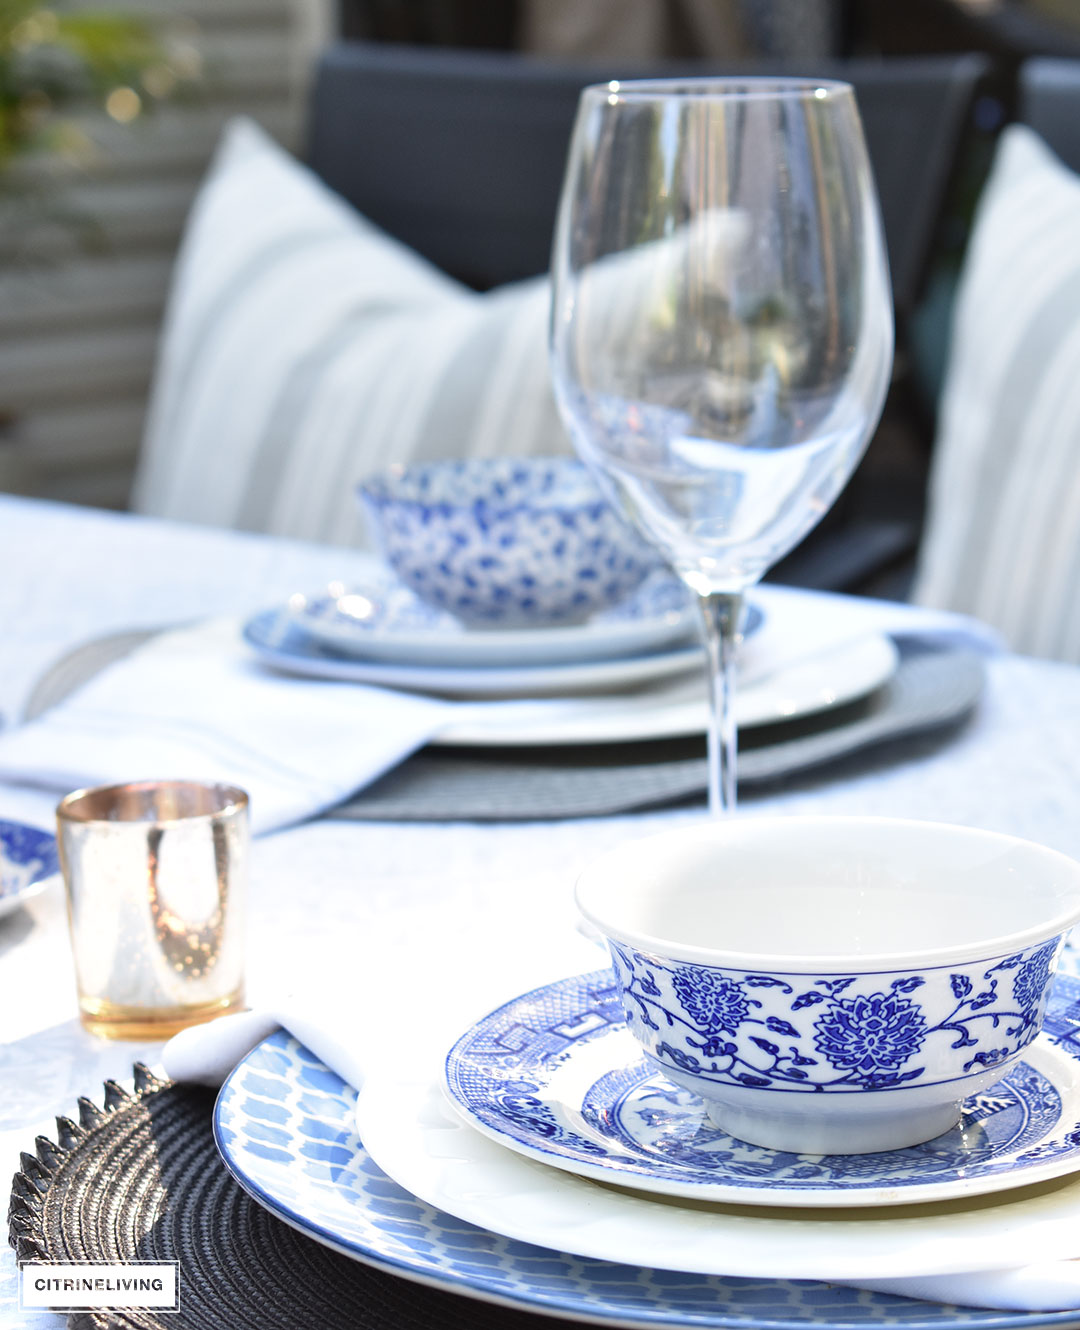 A mix of blue and white pattern on your table creates a refreshing and elegant setting for guests for Summer entertaining or any season.